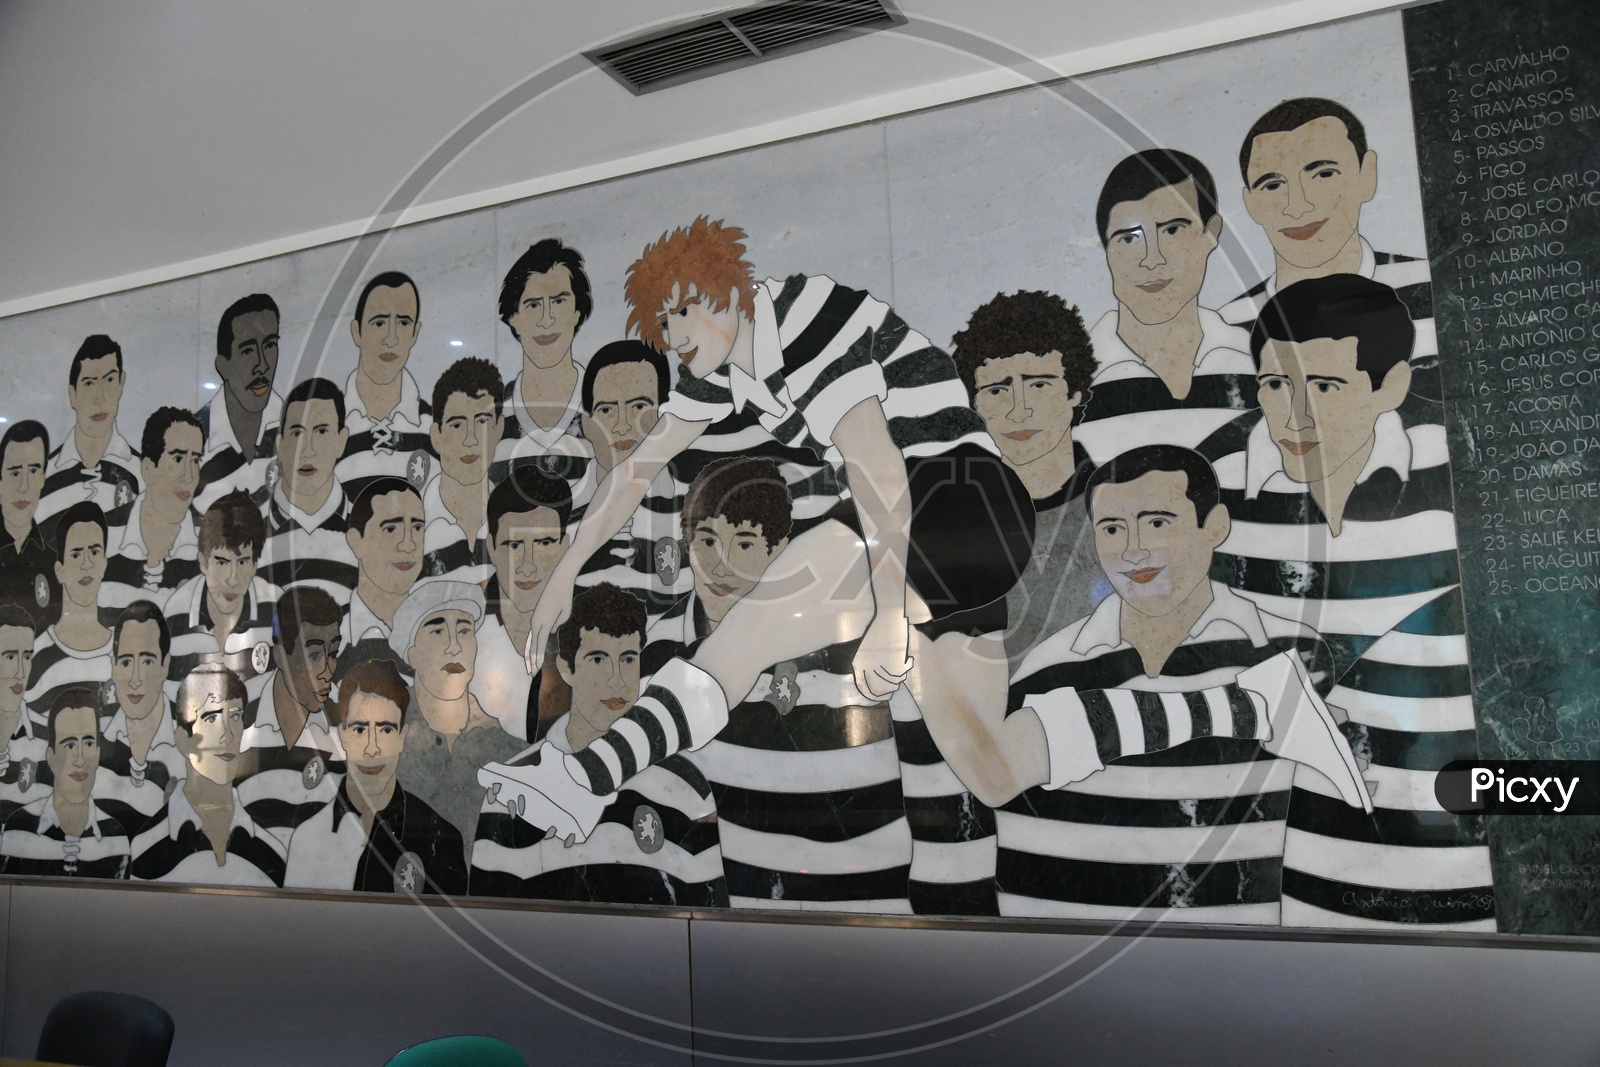 Wall Art With Sports Players in a Stadium